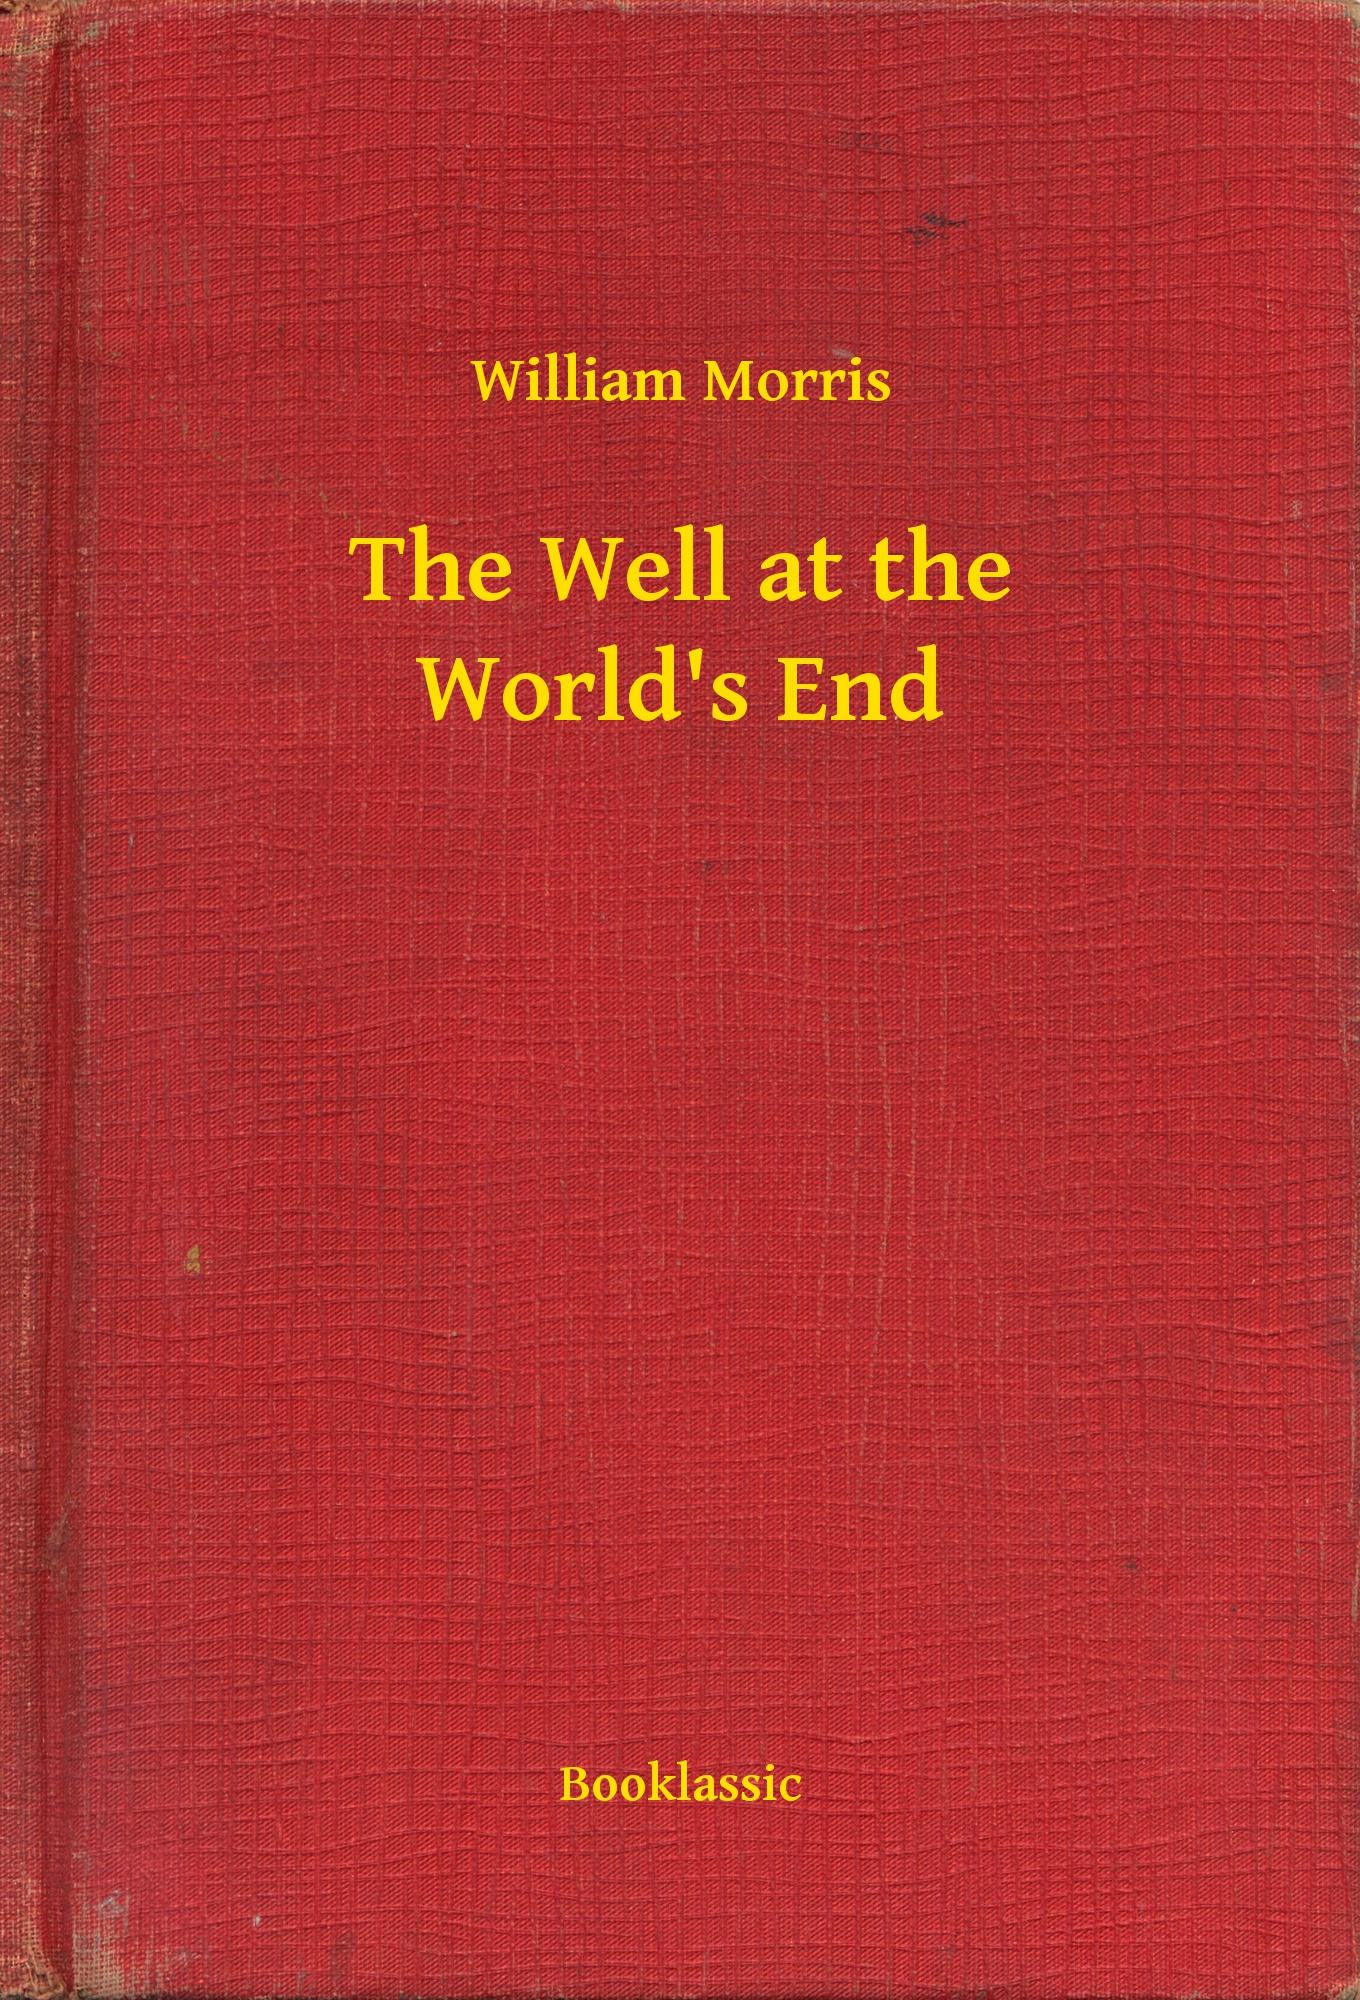 The Well at the World"s End